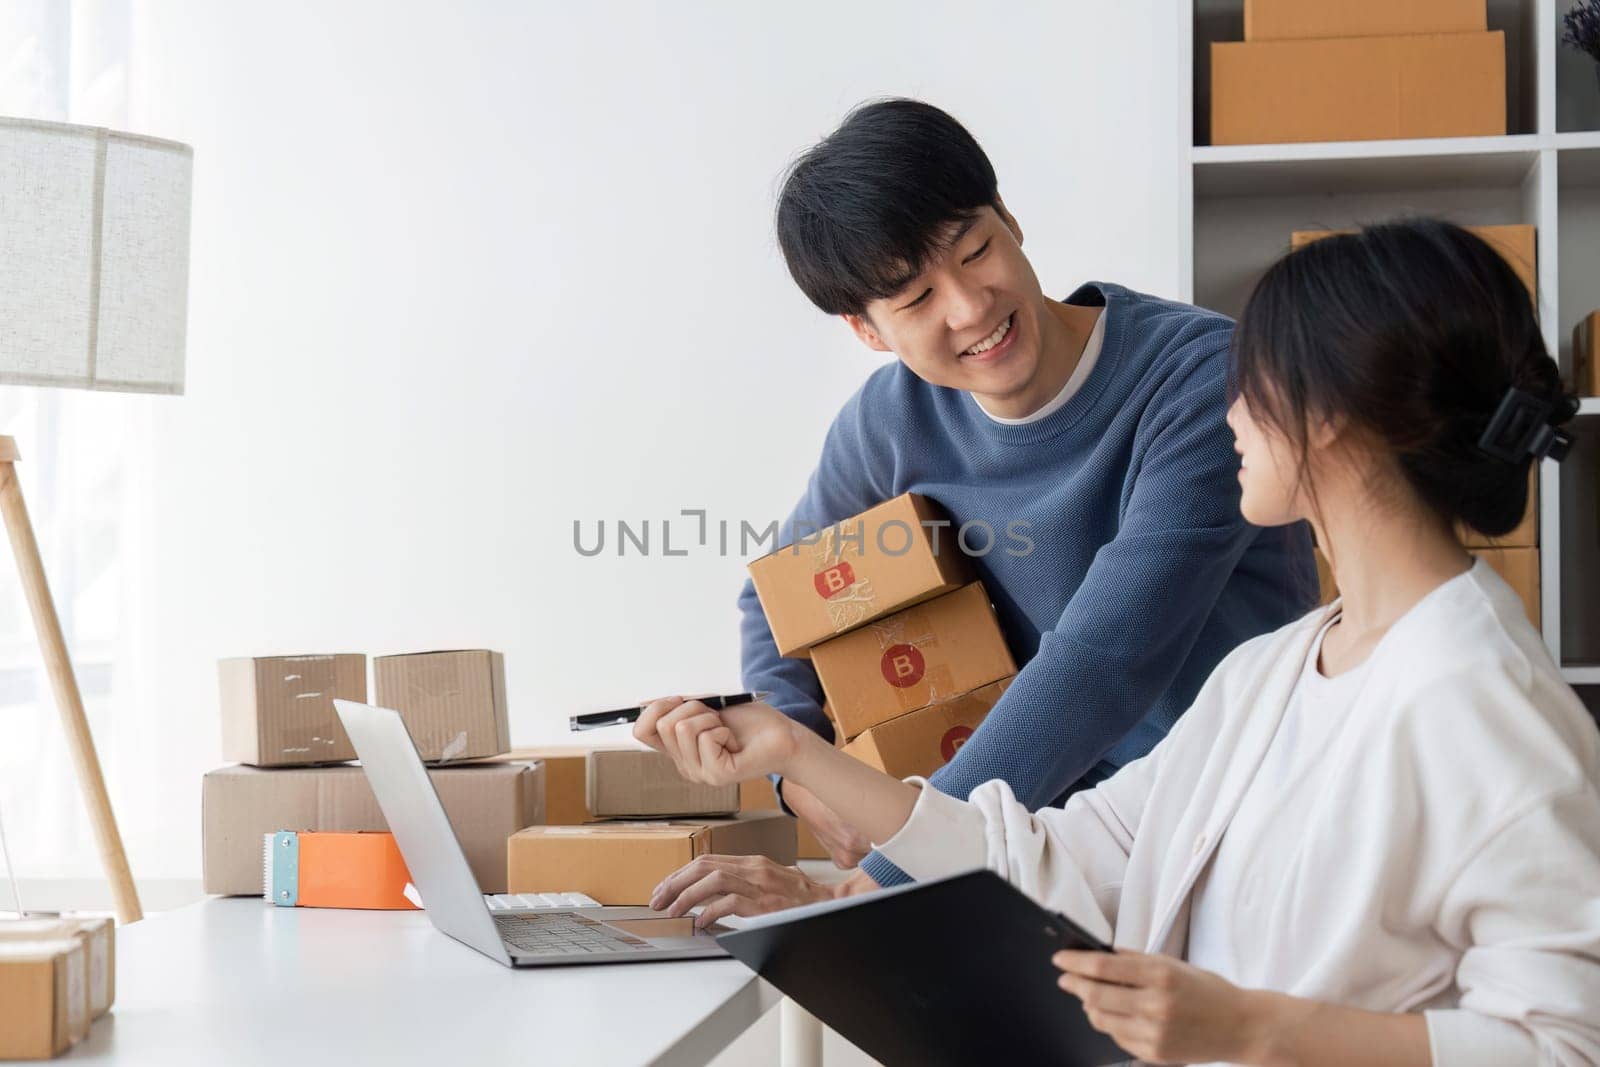 Couple startup small business working with laptop at workplace. freelance man and woman seller check product order, packing goods for delivery to customer. Online selling, e-commerce.